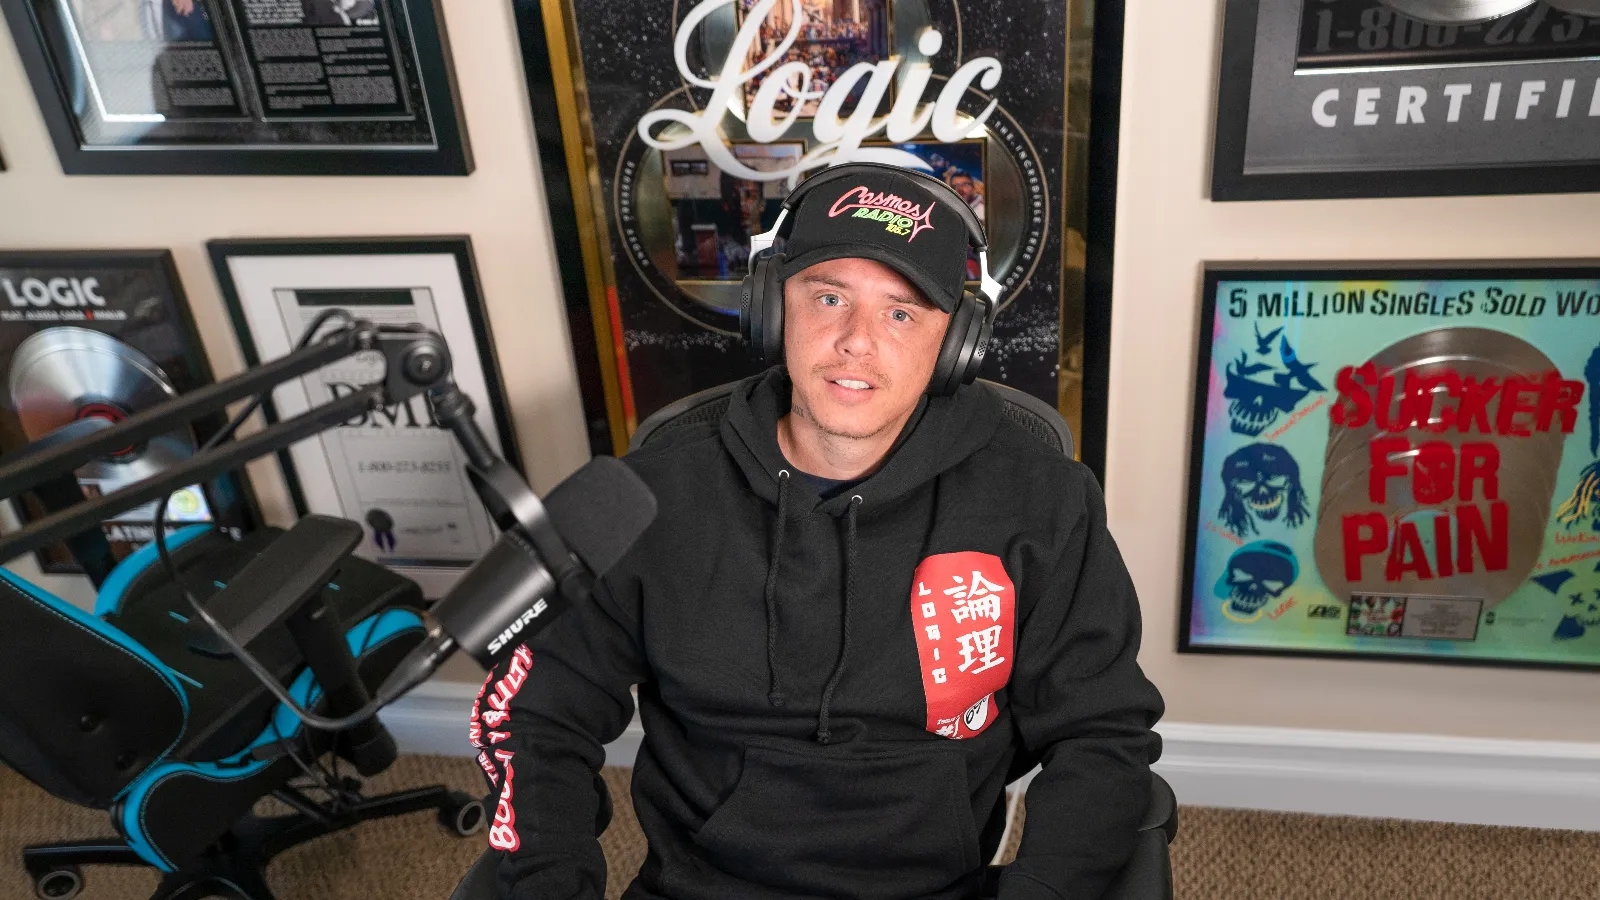 Logic Chills Out in His Streaming Studio with the Shure AONIC 50 Wireless Headphones and MV7 Podcast Mic